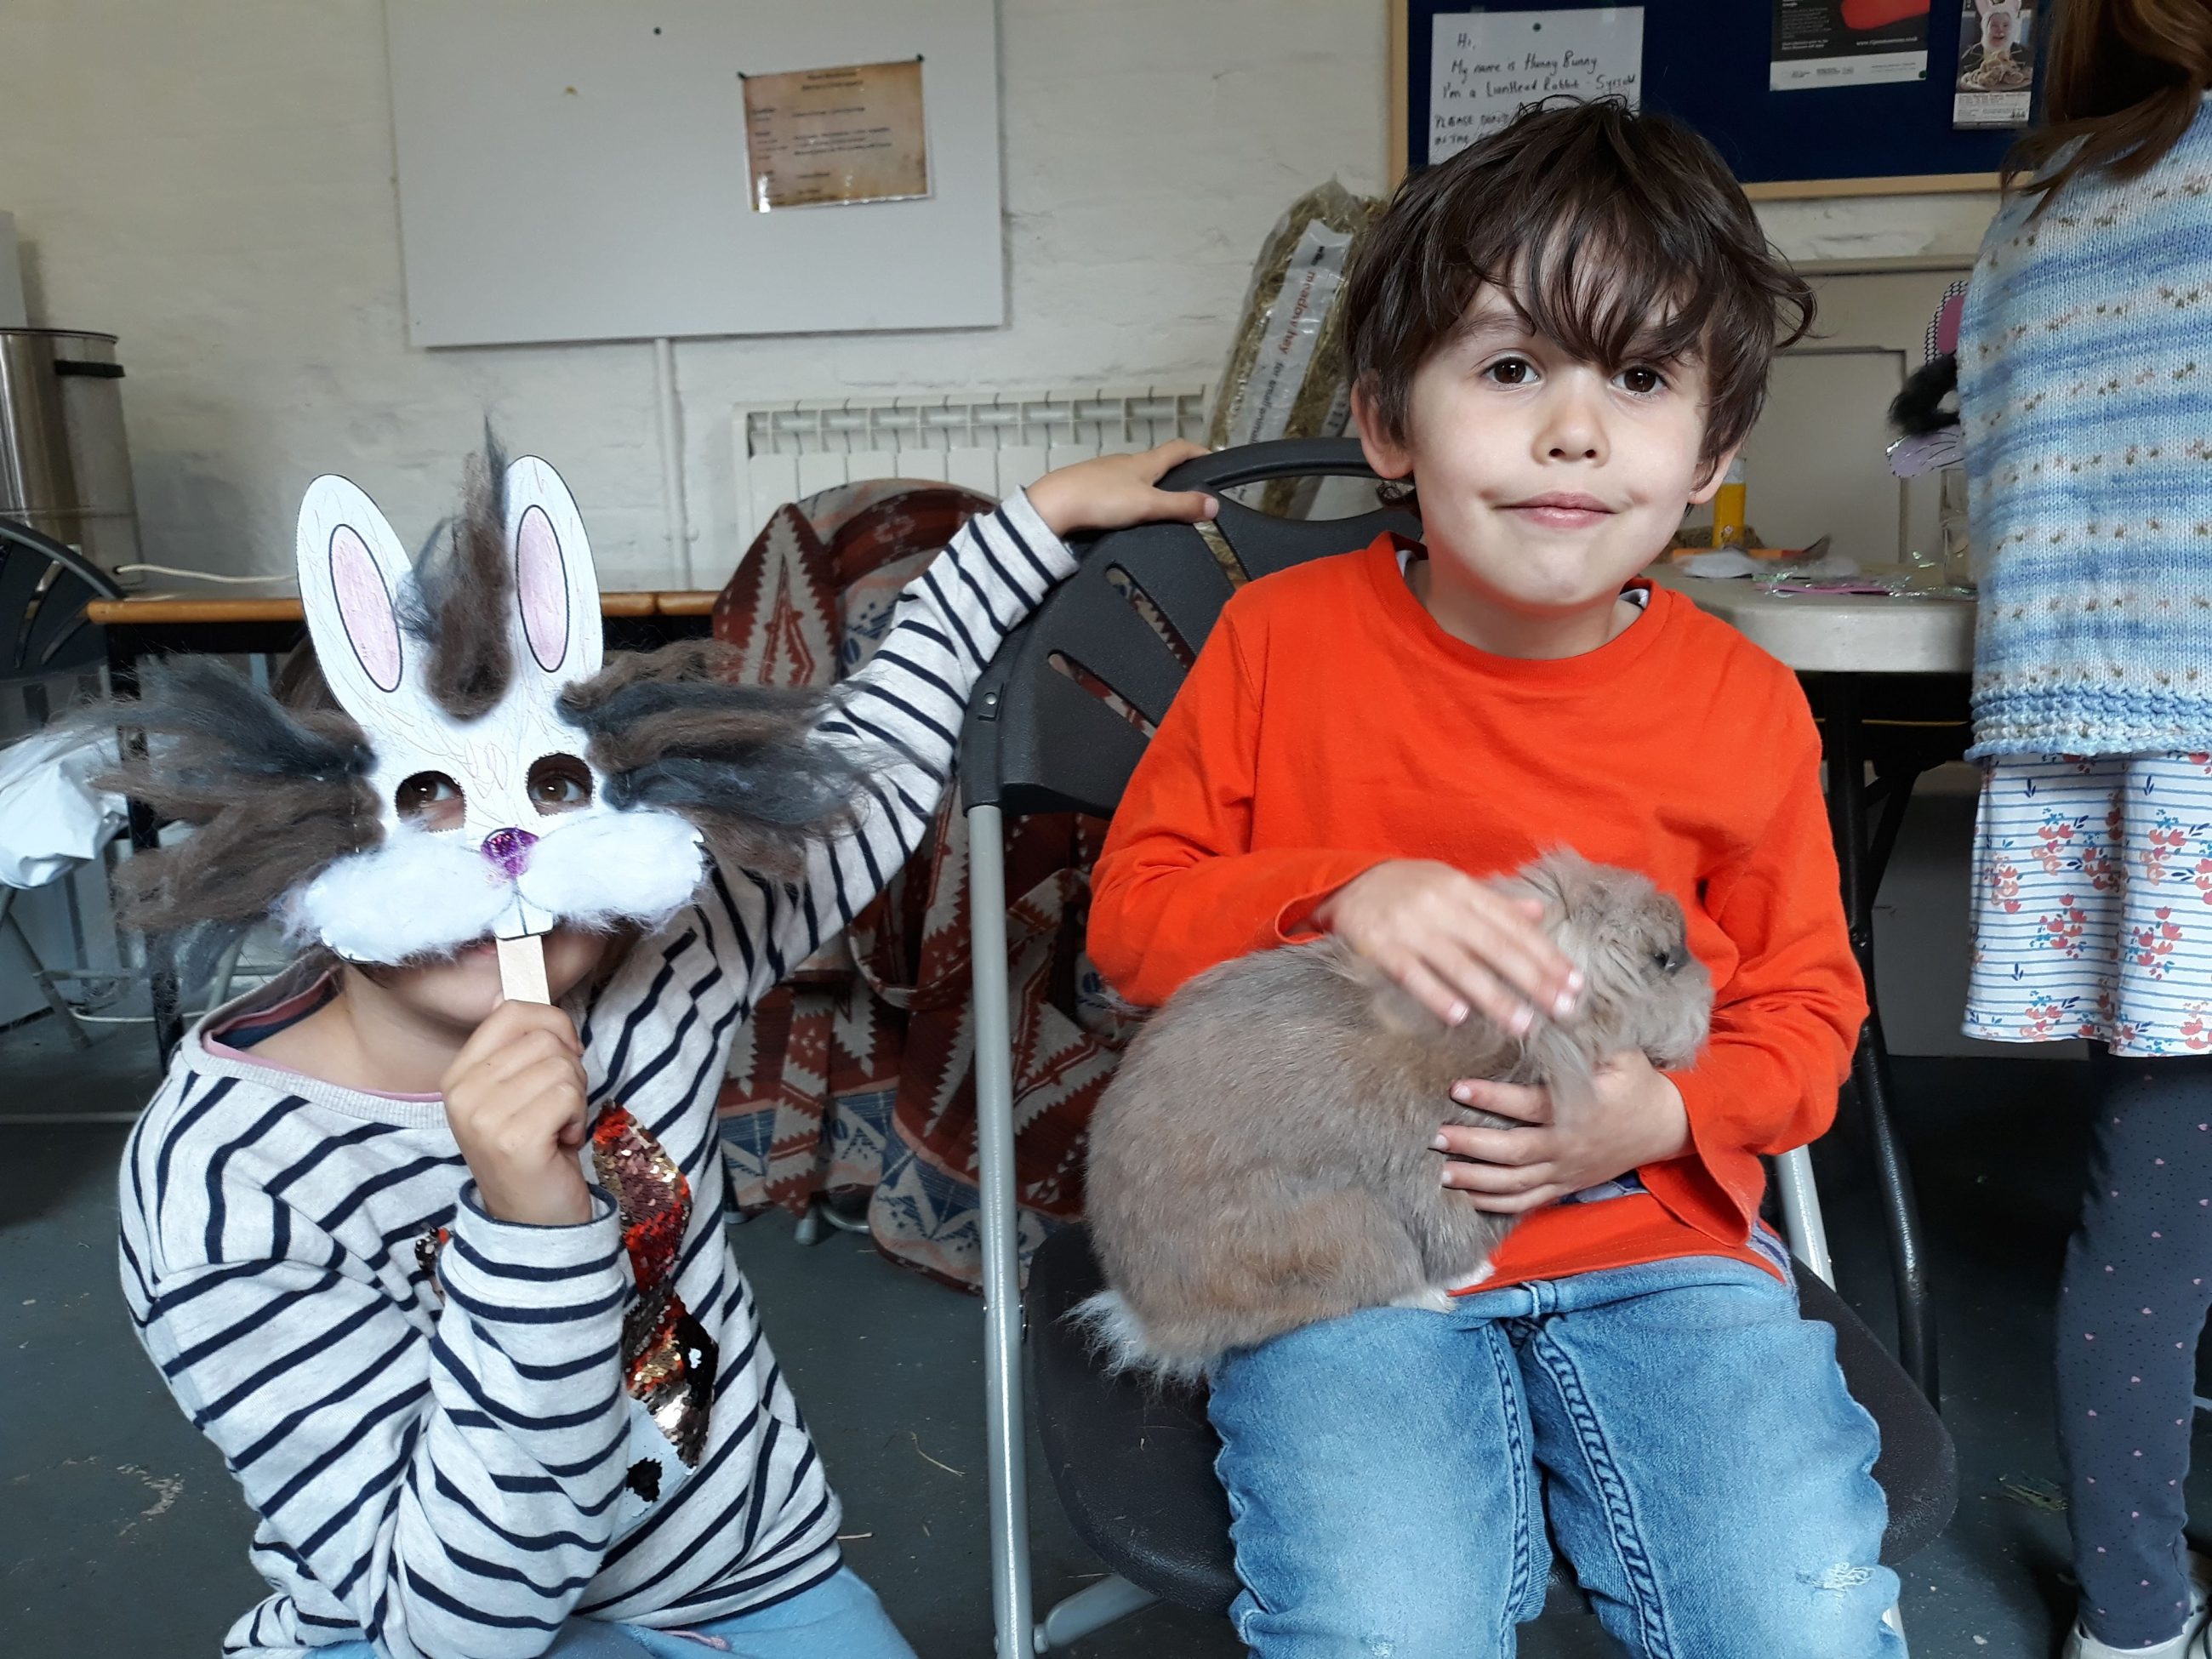 Easter activities and bunny rabbit